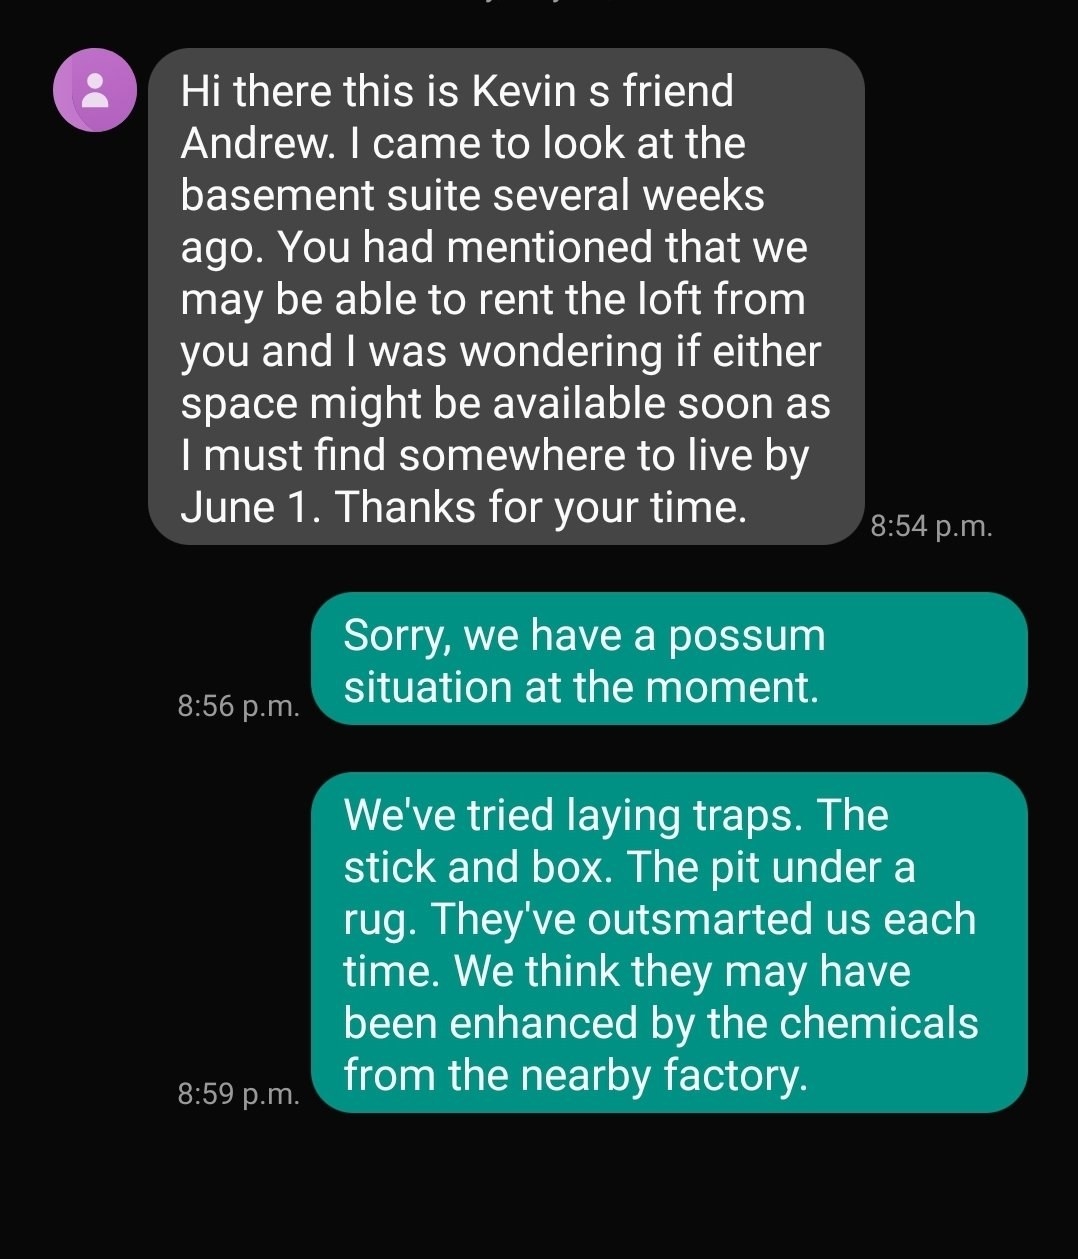 Person texts about basement or loft space to rent and coming to see it, and person responds that they have a &quot;possum situation&quot; and the possums have outsmarted them and they think they may have been enhanced by chemicals from a nearby factory